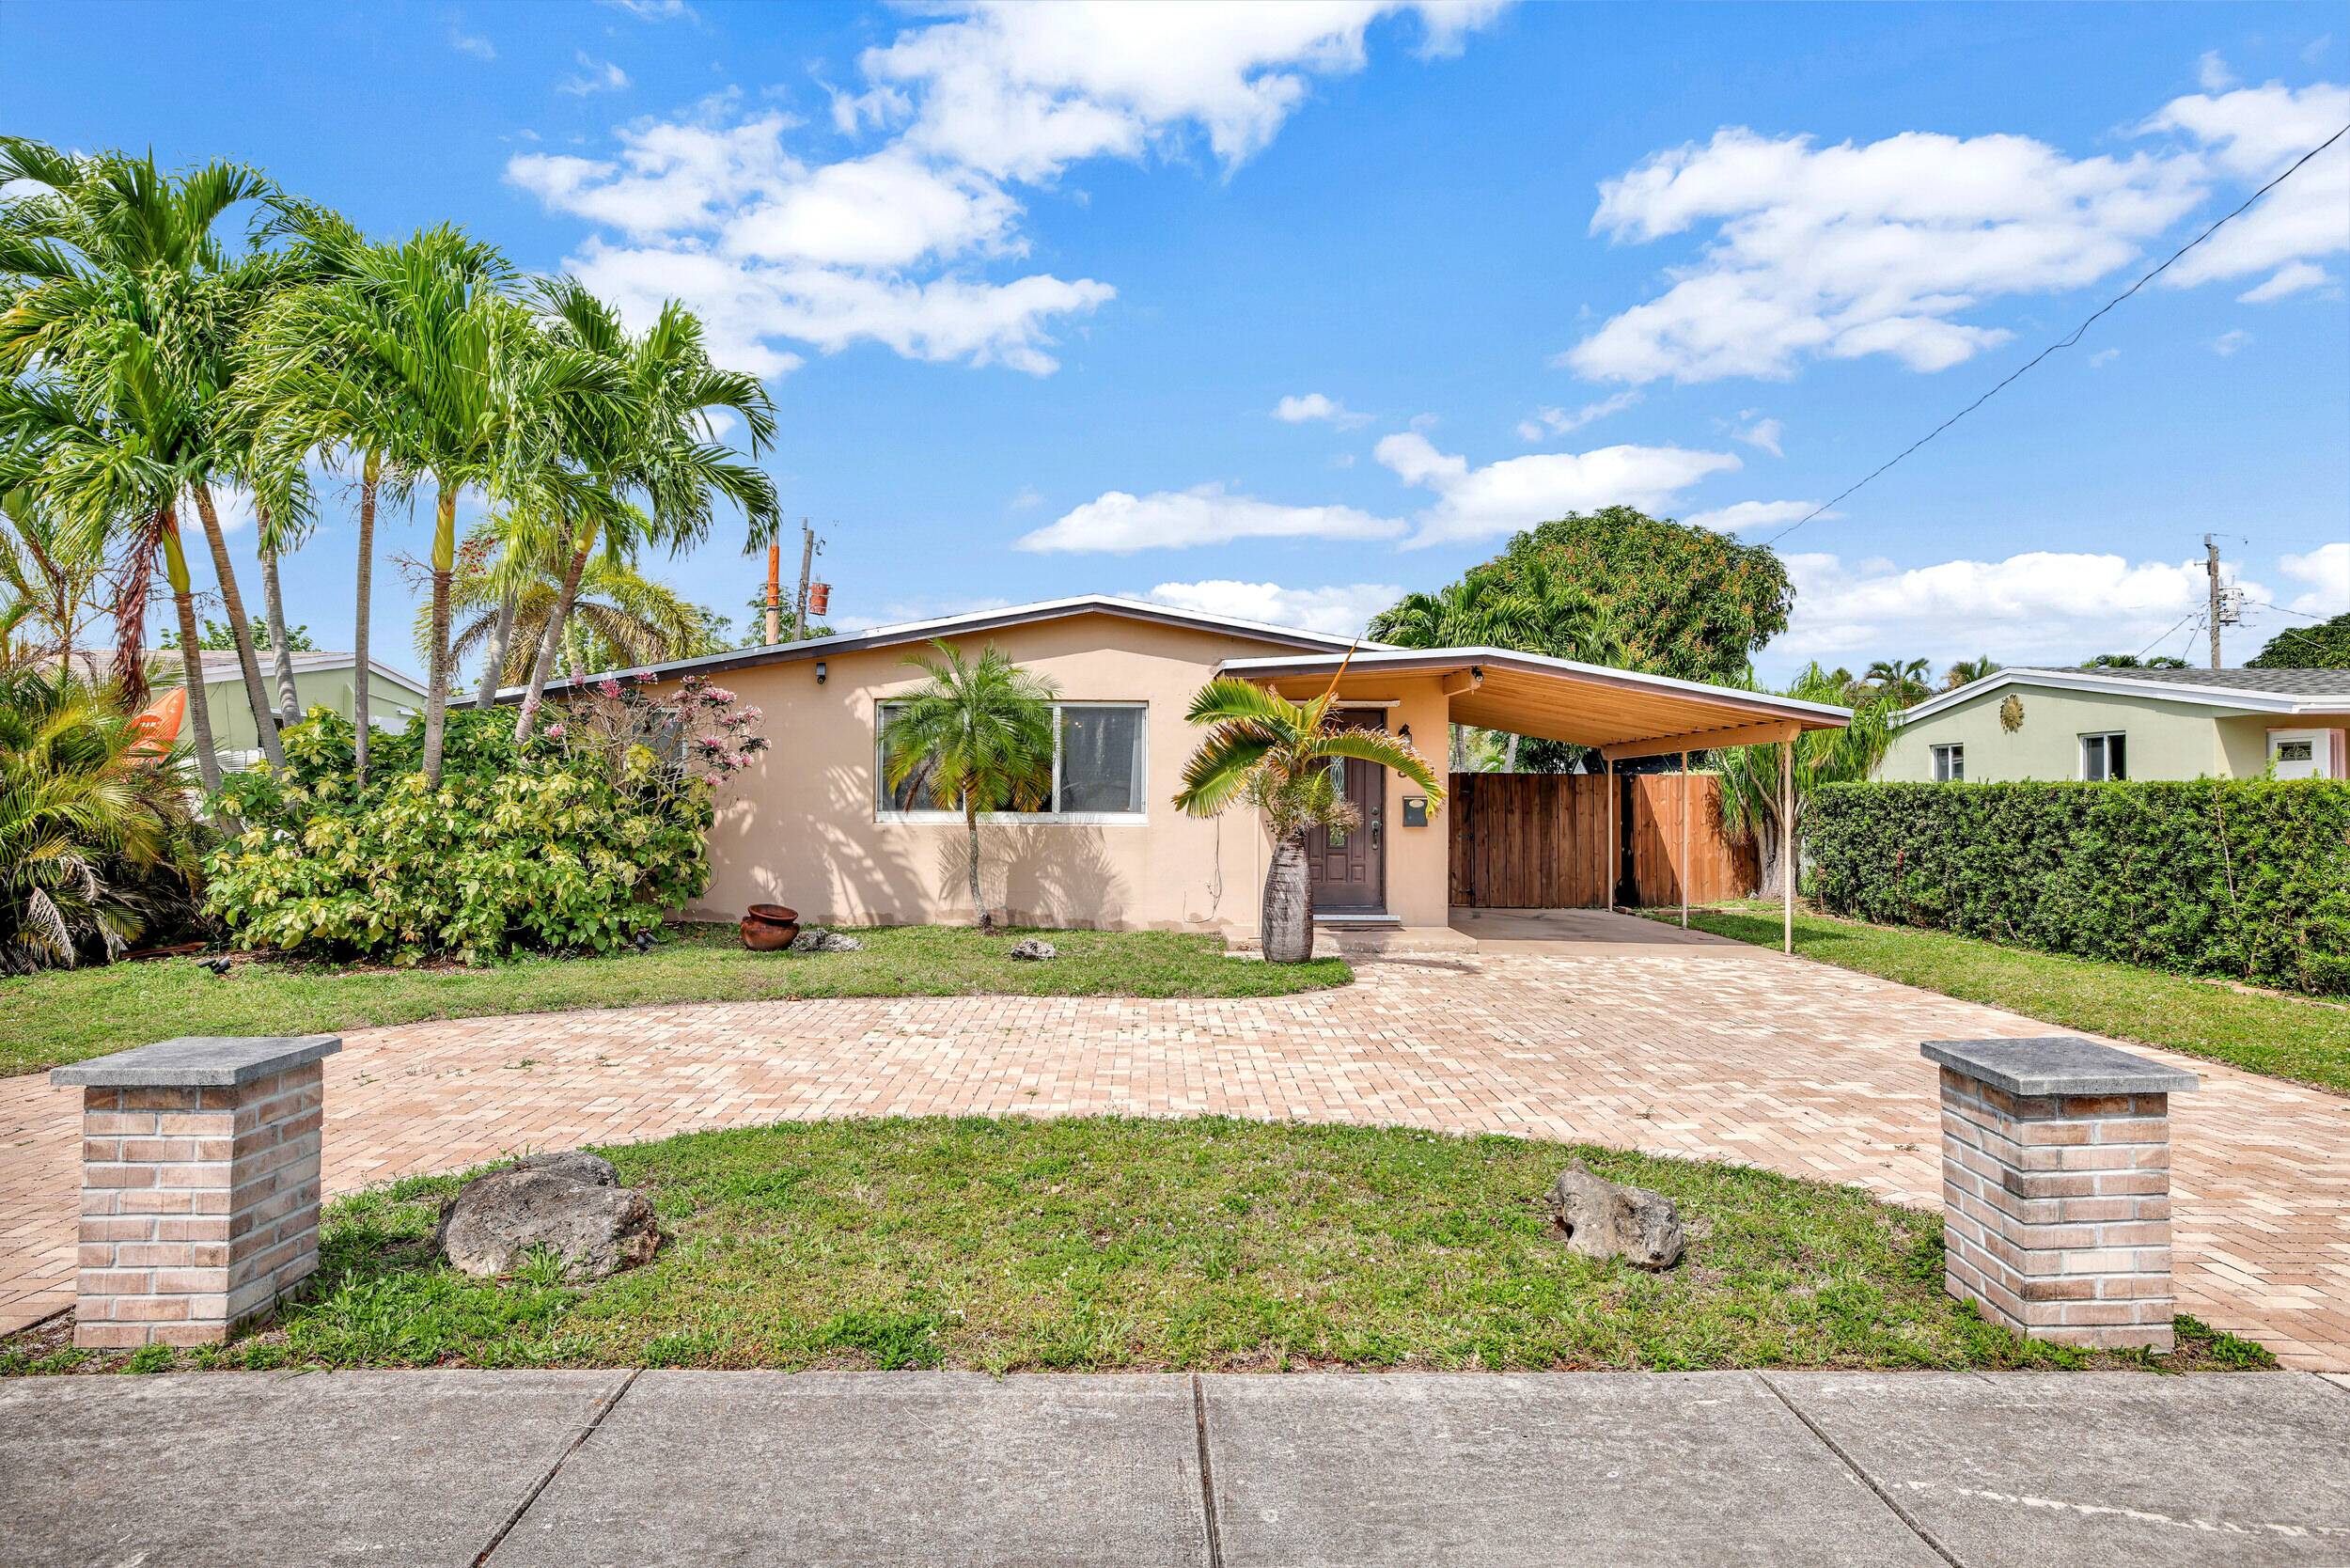 Updated 3 bedroom, 1 bath home in the desirable Collier Estates neighborhood of Oakland Park, featuring updated kitchen with Silestone countertops, tiled backsplash, and stainless steel refrigerator and tons of ...